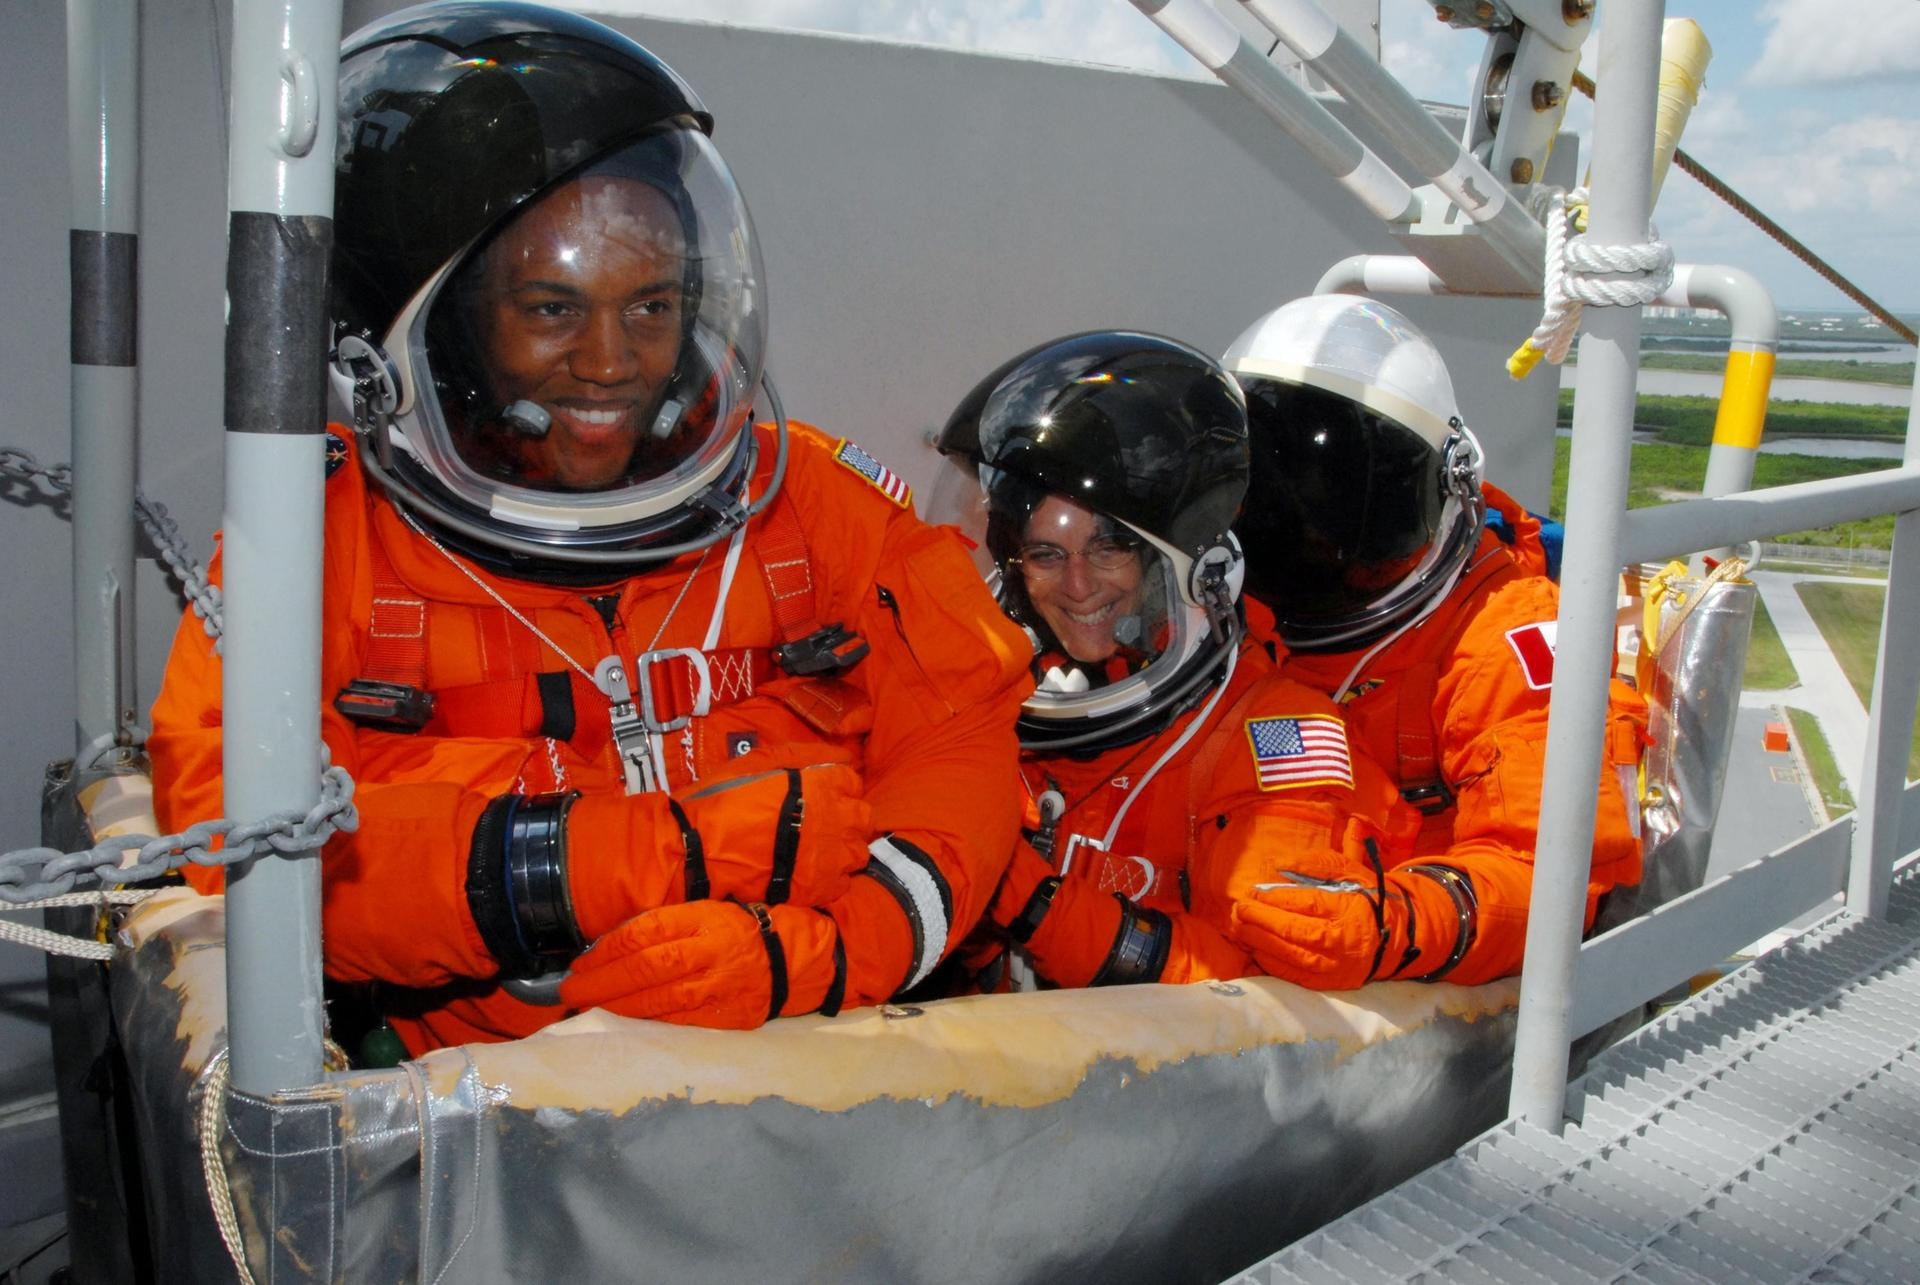 three people stand in a gurney wearing bright orange spacesuits.